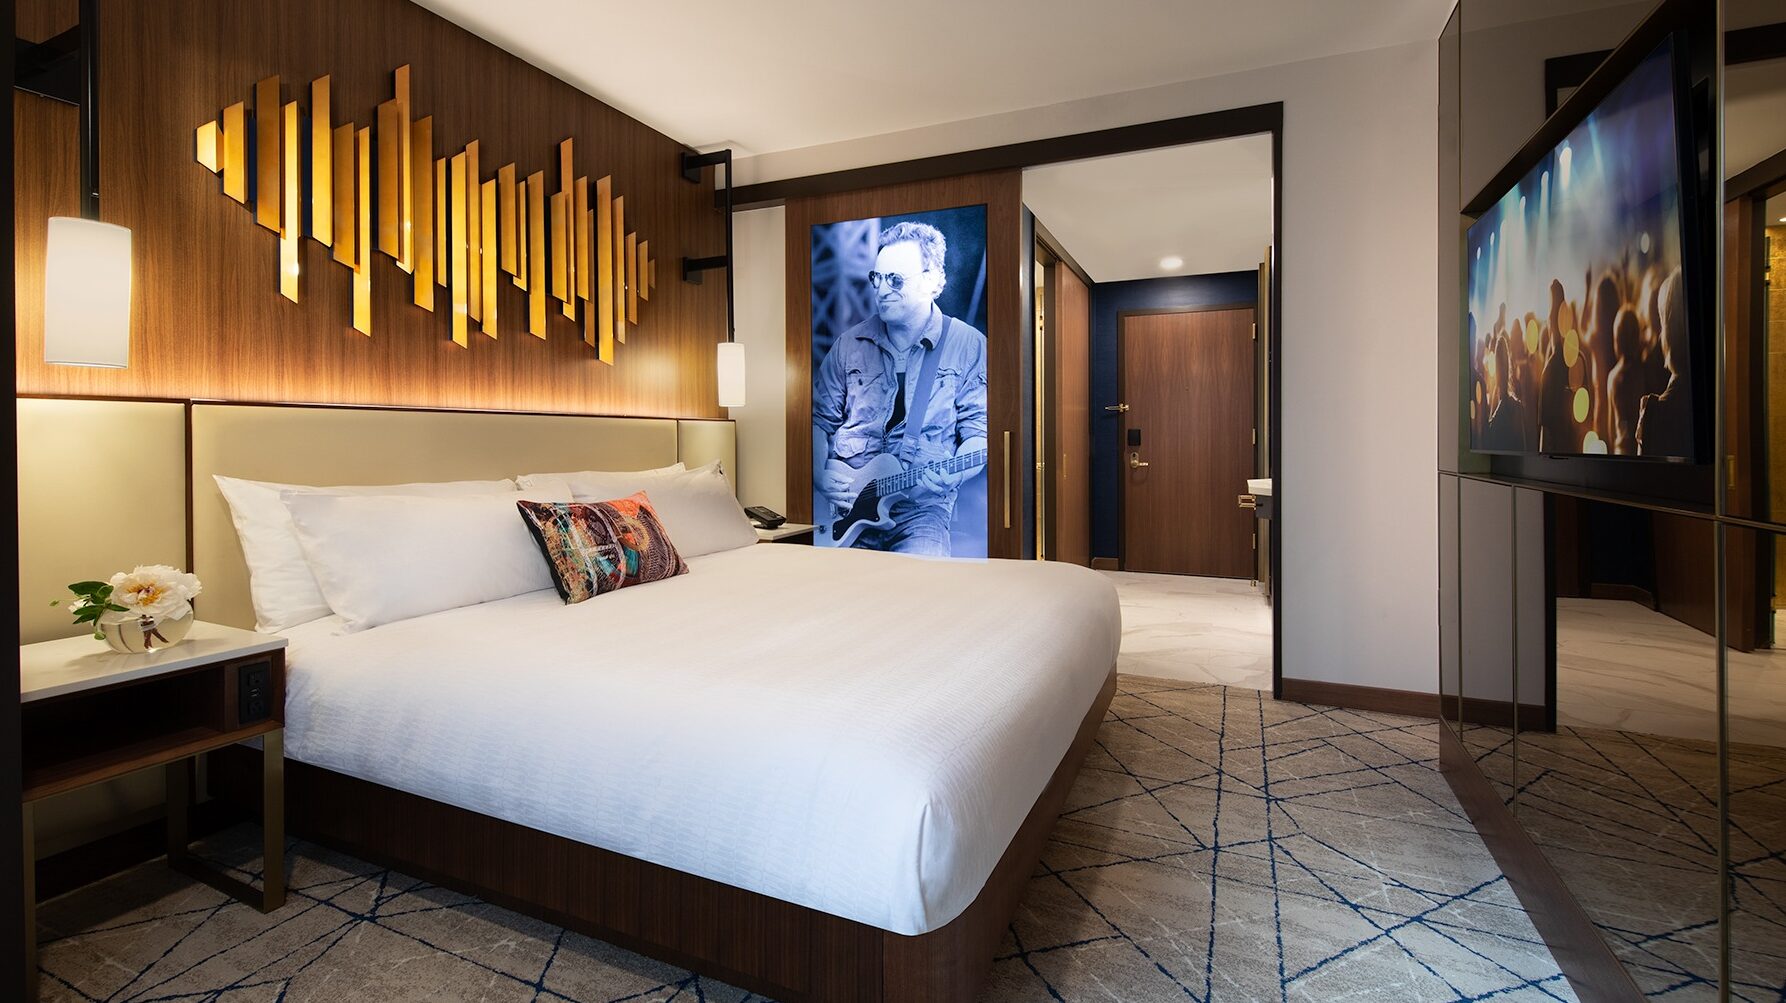 A guest room at hard rock hotel new york. There is a gold accent piece above the bed and a musician's portrait on the bathroom door